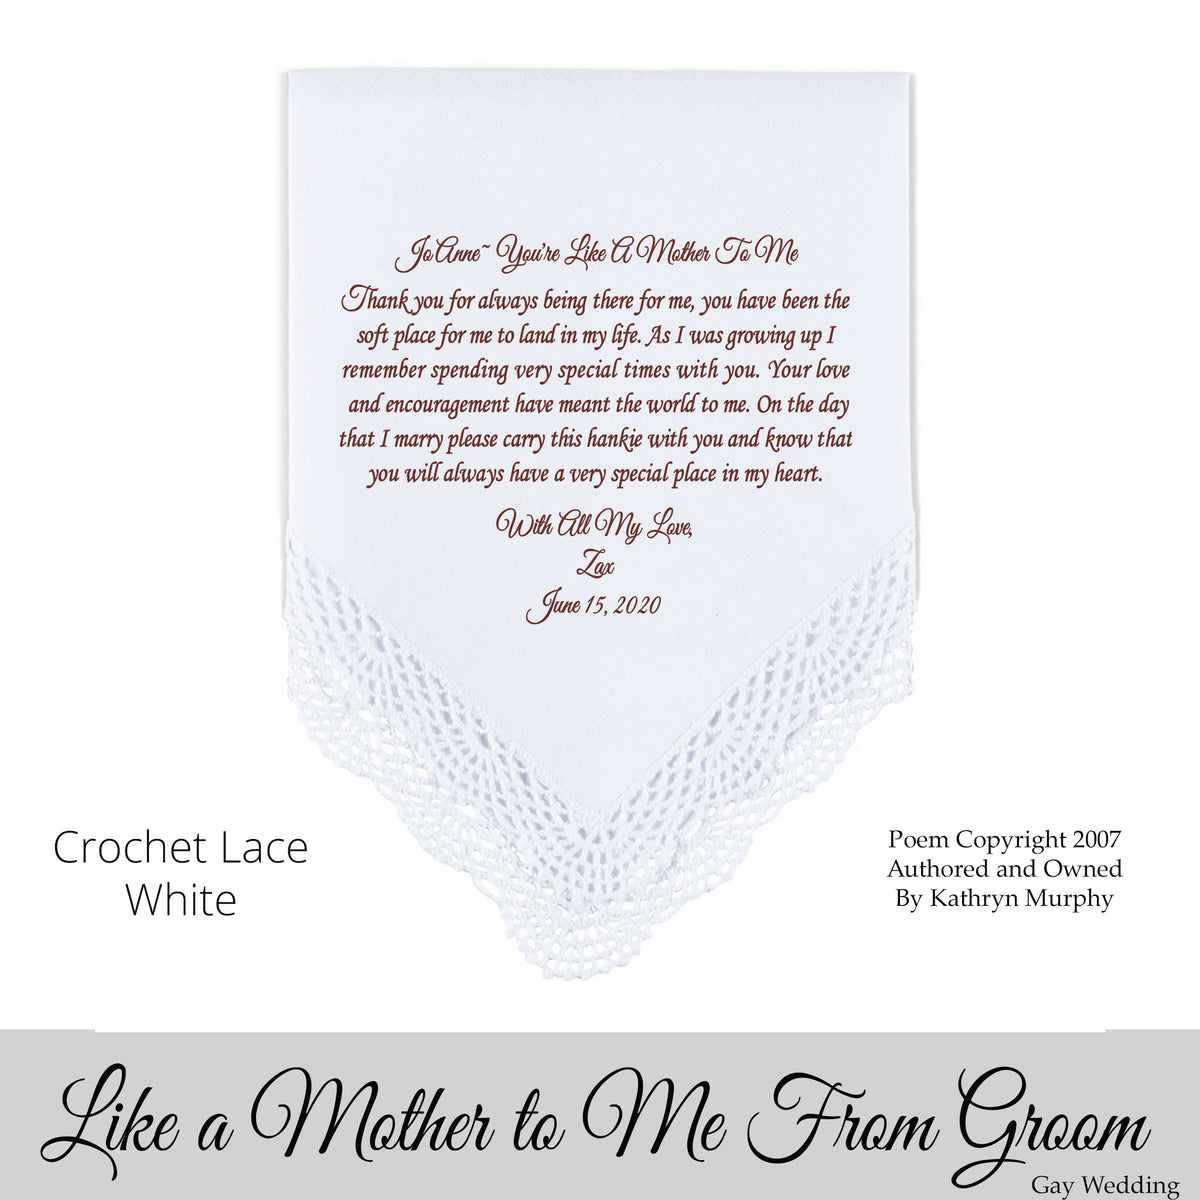 Gay Wedding Gift for the Like a Mother to Me poem printed wedding hankie